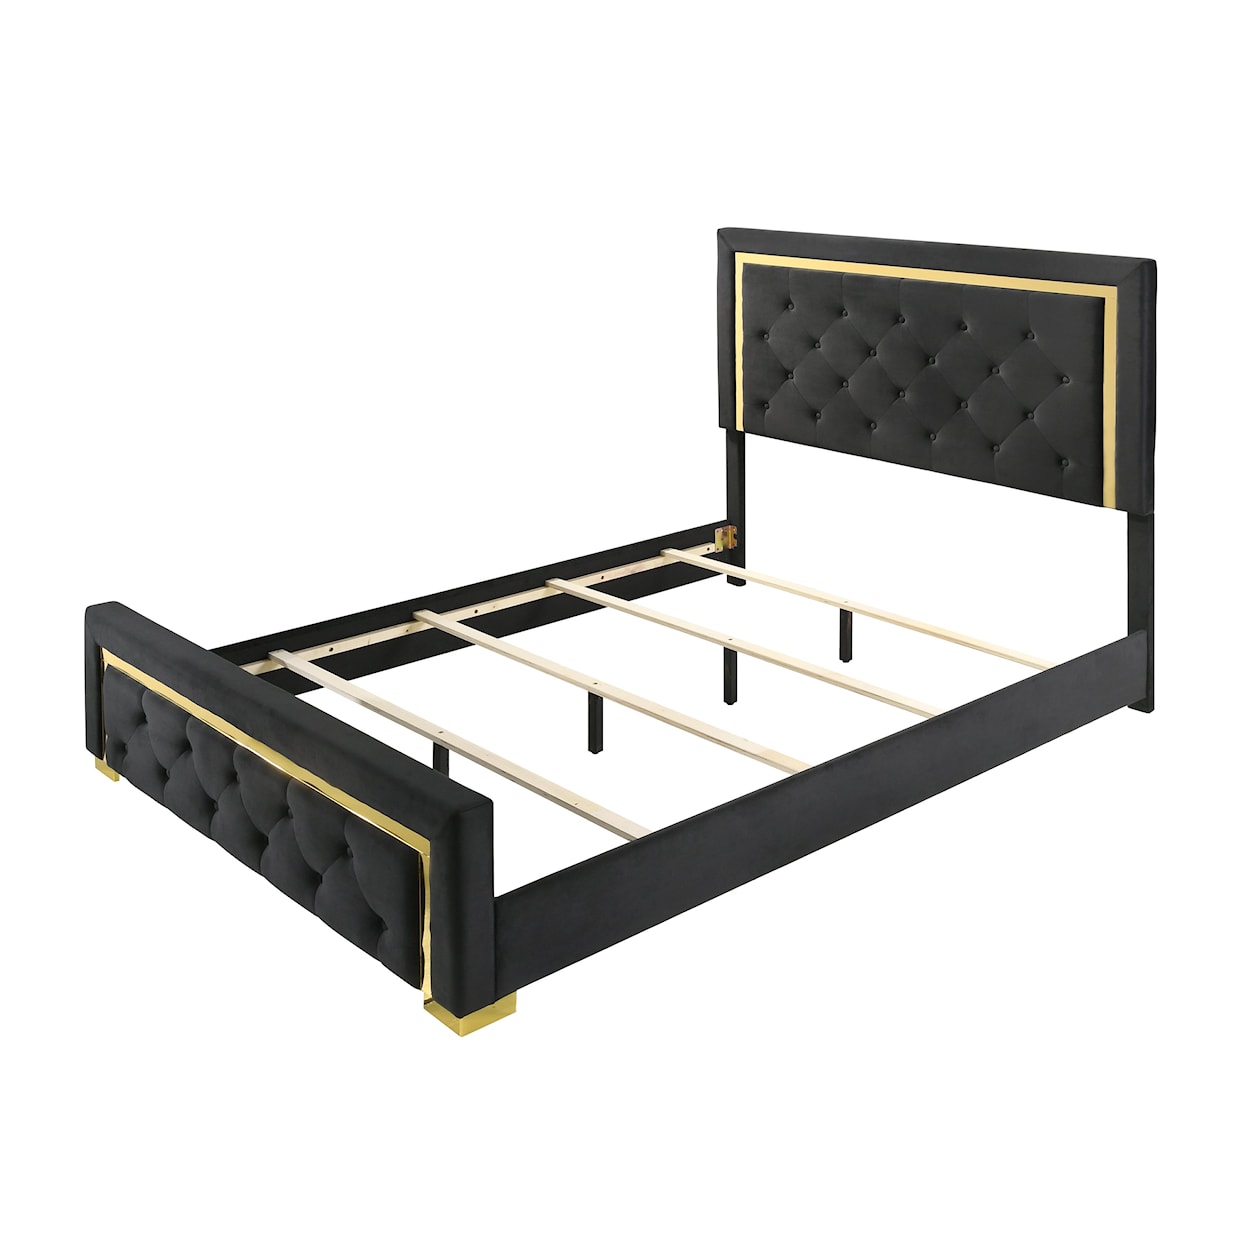 Crown Mark Le'Pew LE'PEW BLACK AND GOLD QUEEN BED |